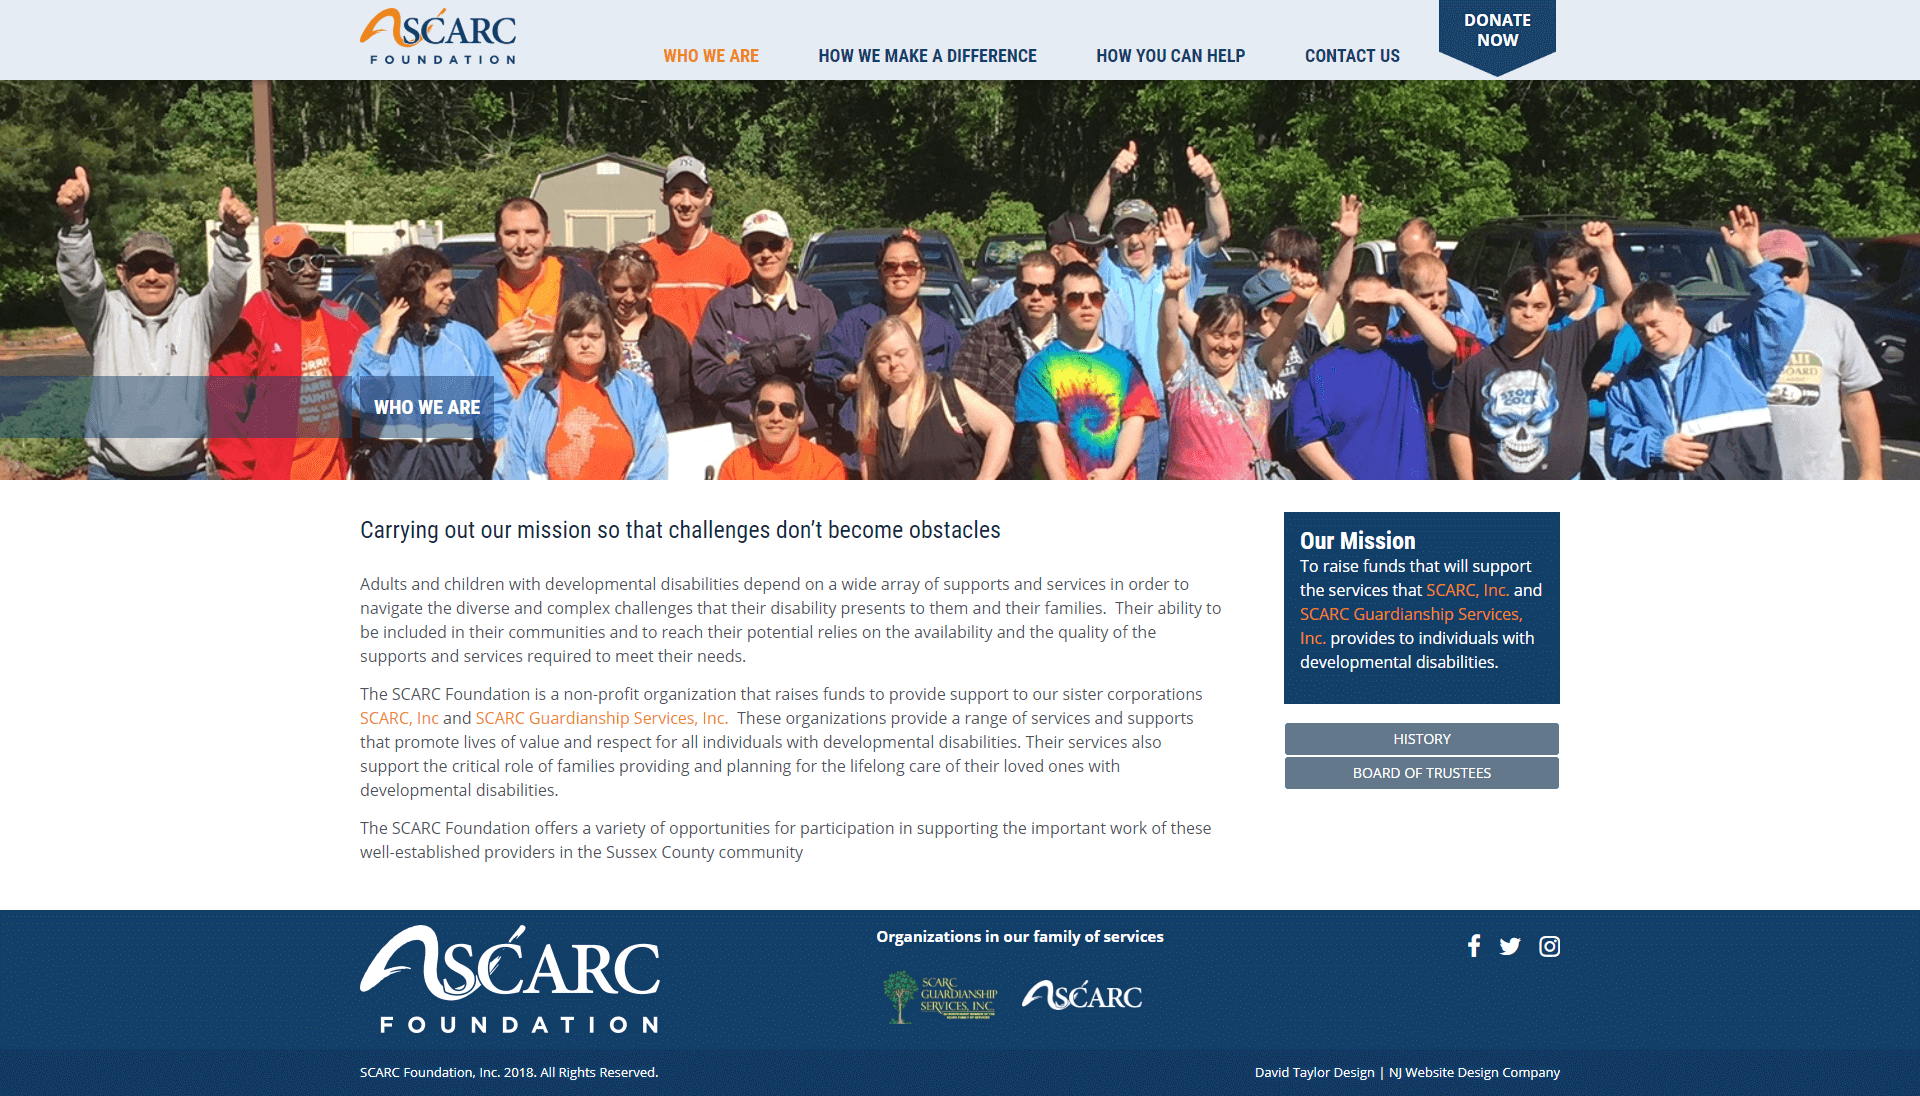 SCARC Foundation – Who We Are